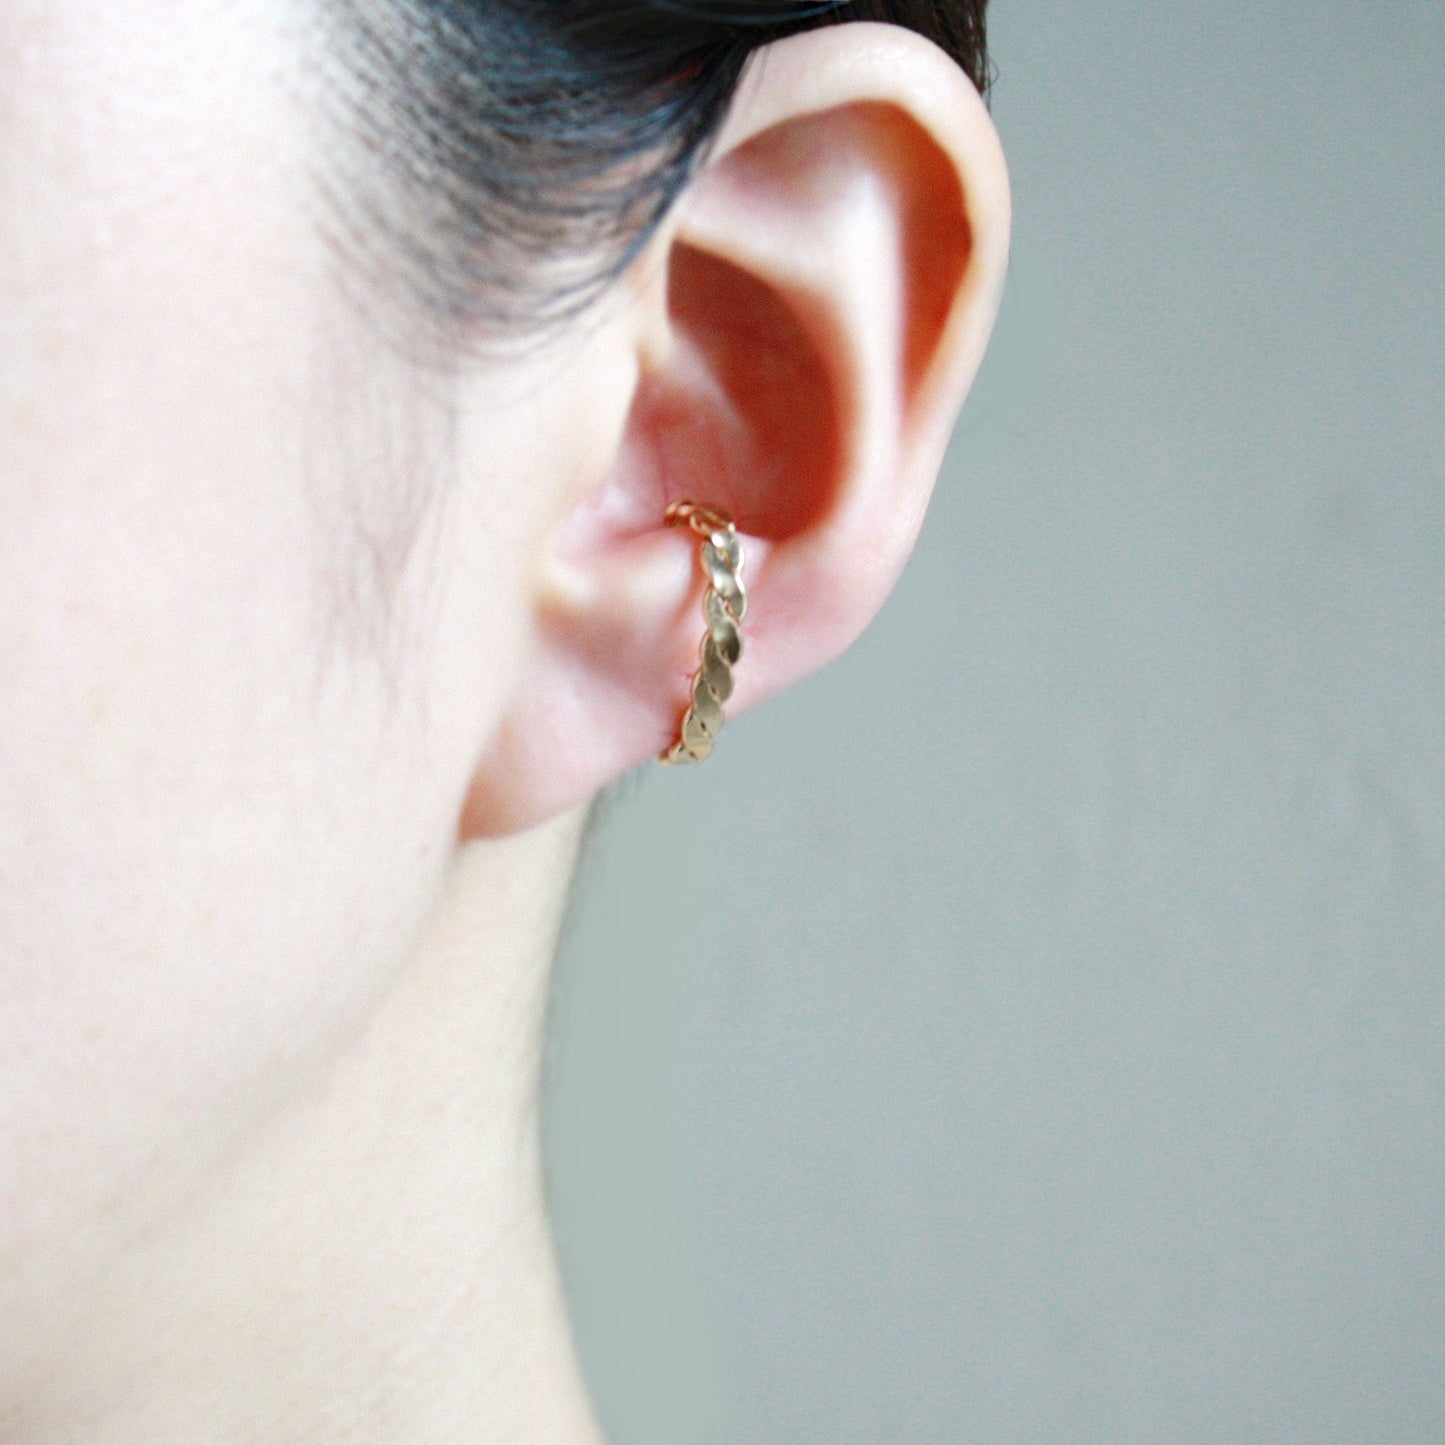 Twisted Patterned Ear Cuff